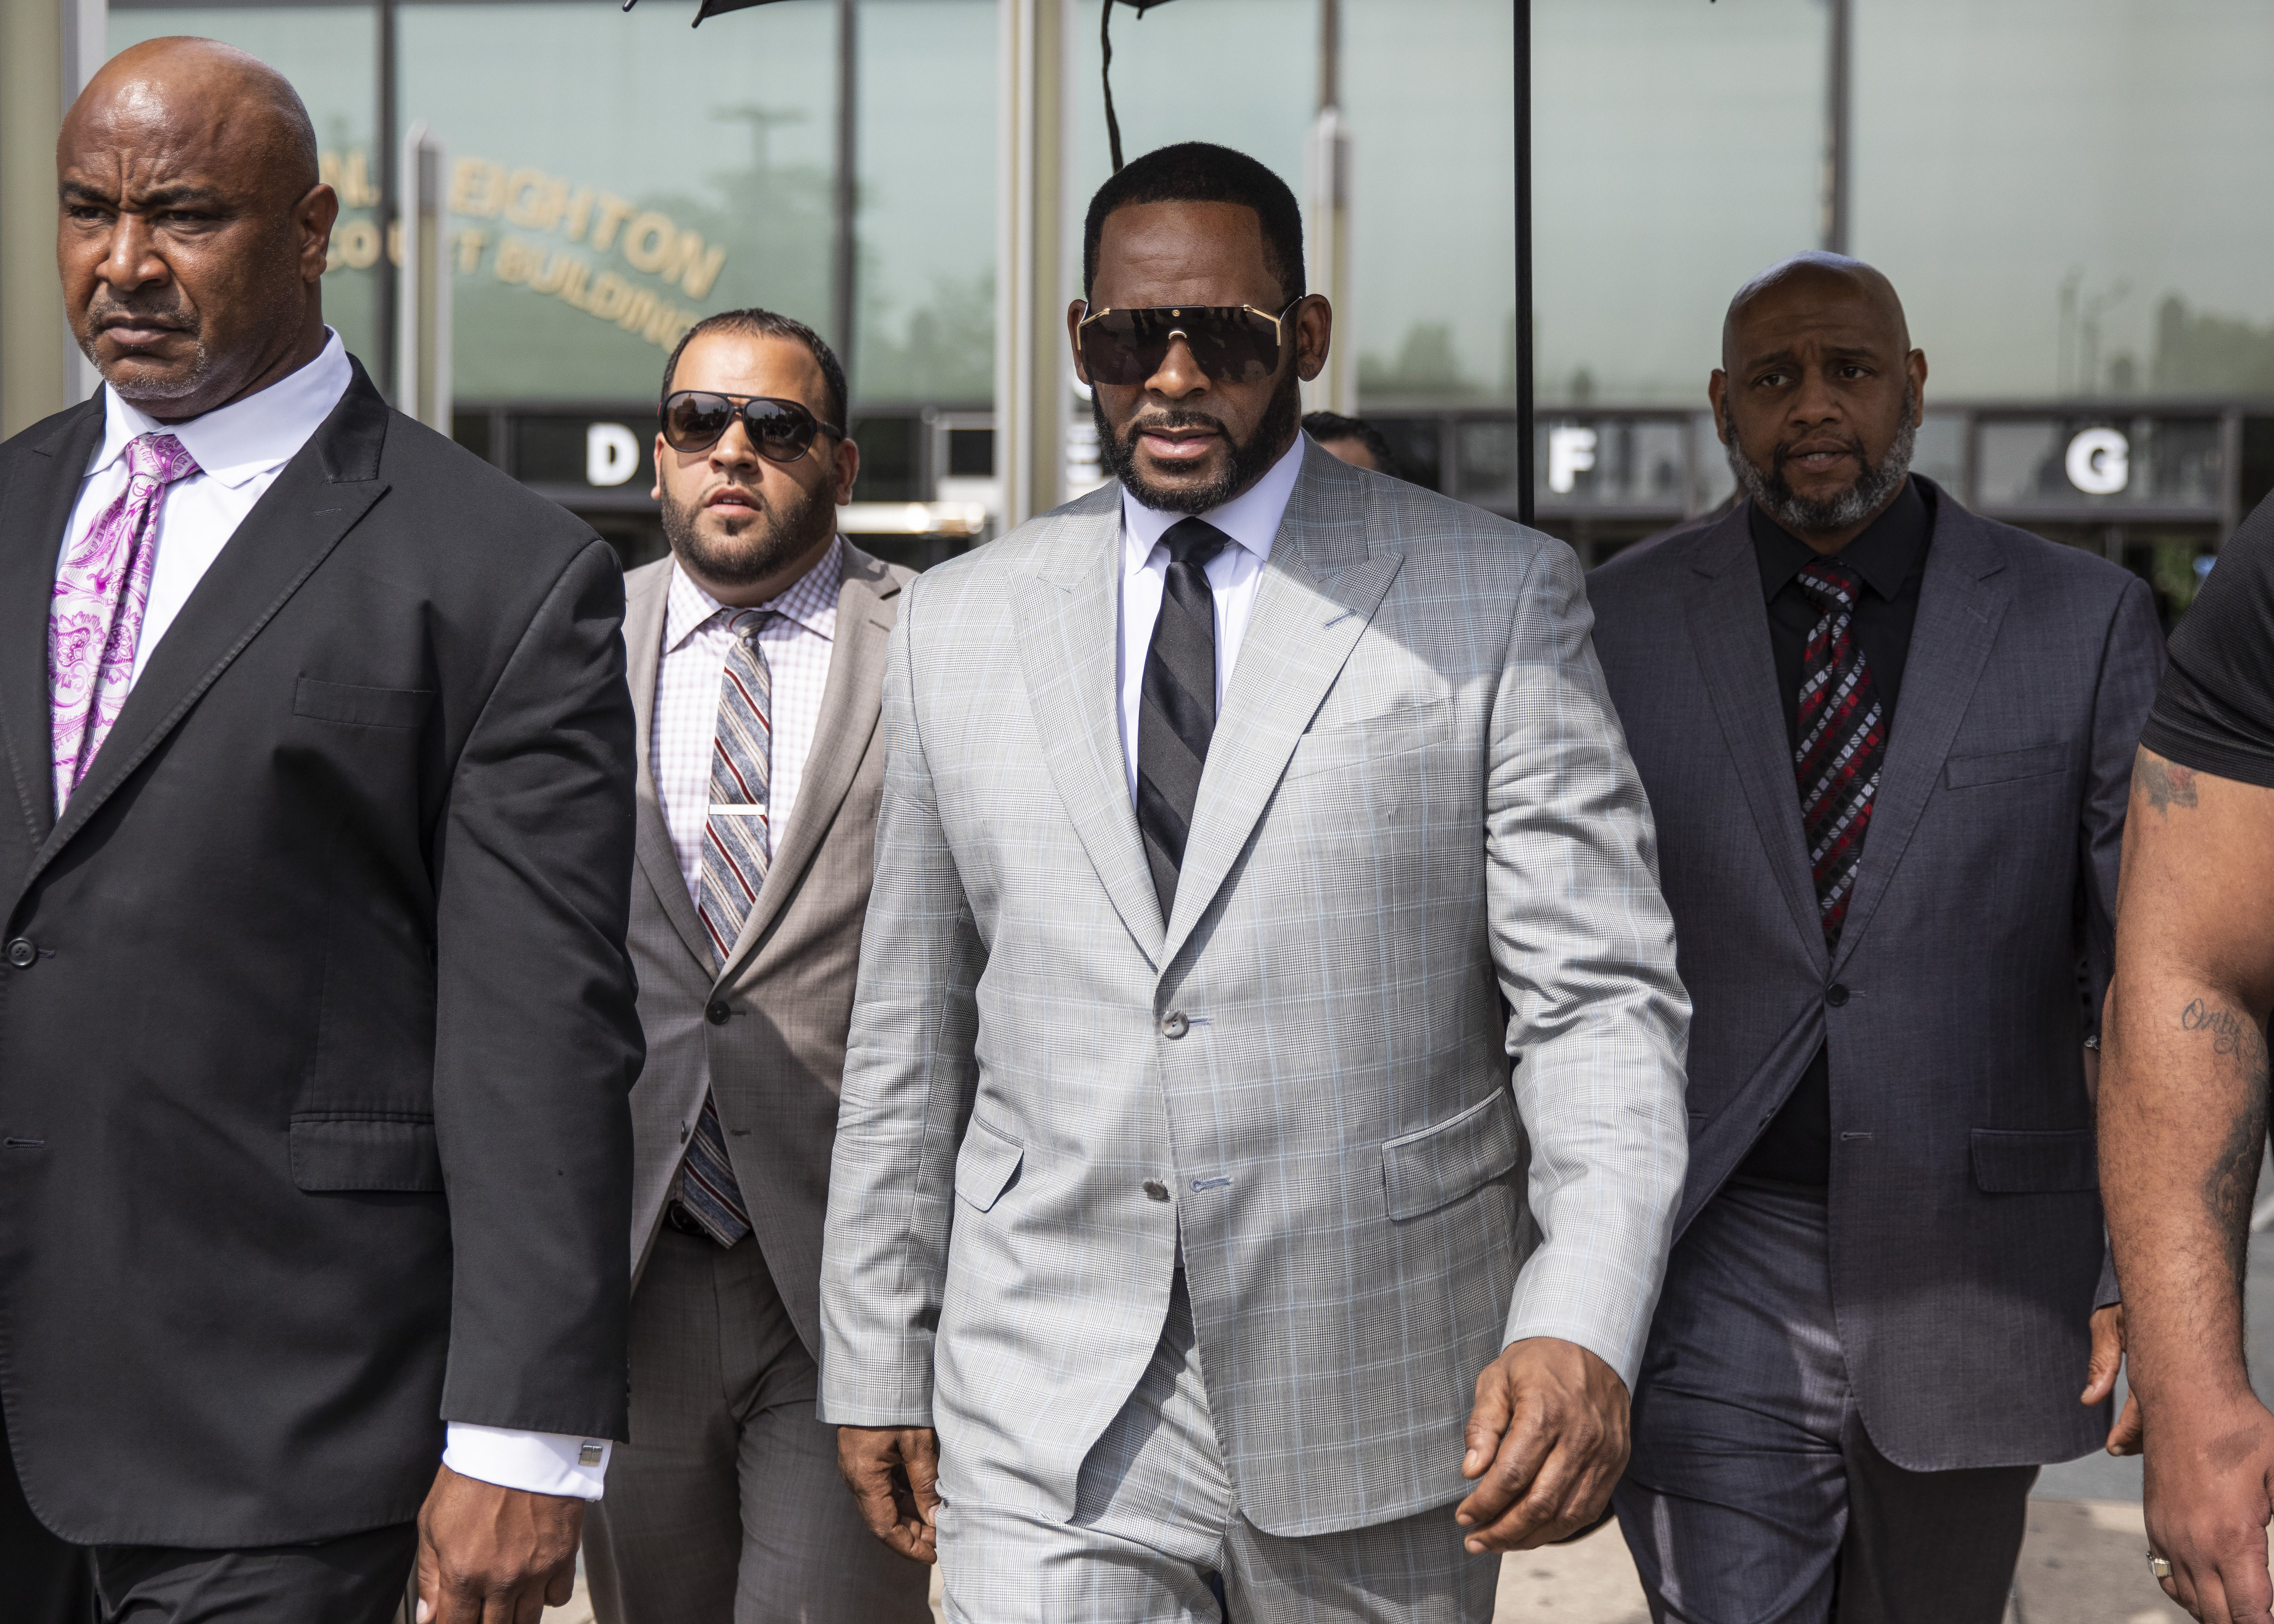 R. Kelly walks with supporters out of the Leighton Criminal Courthouse in June 2019.